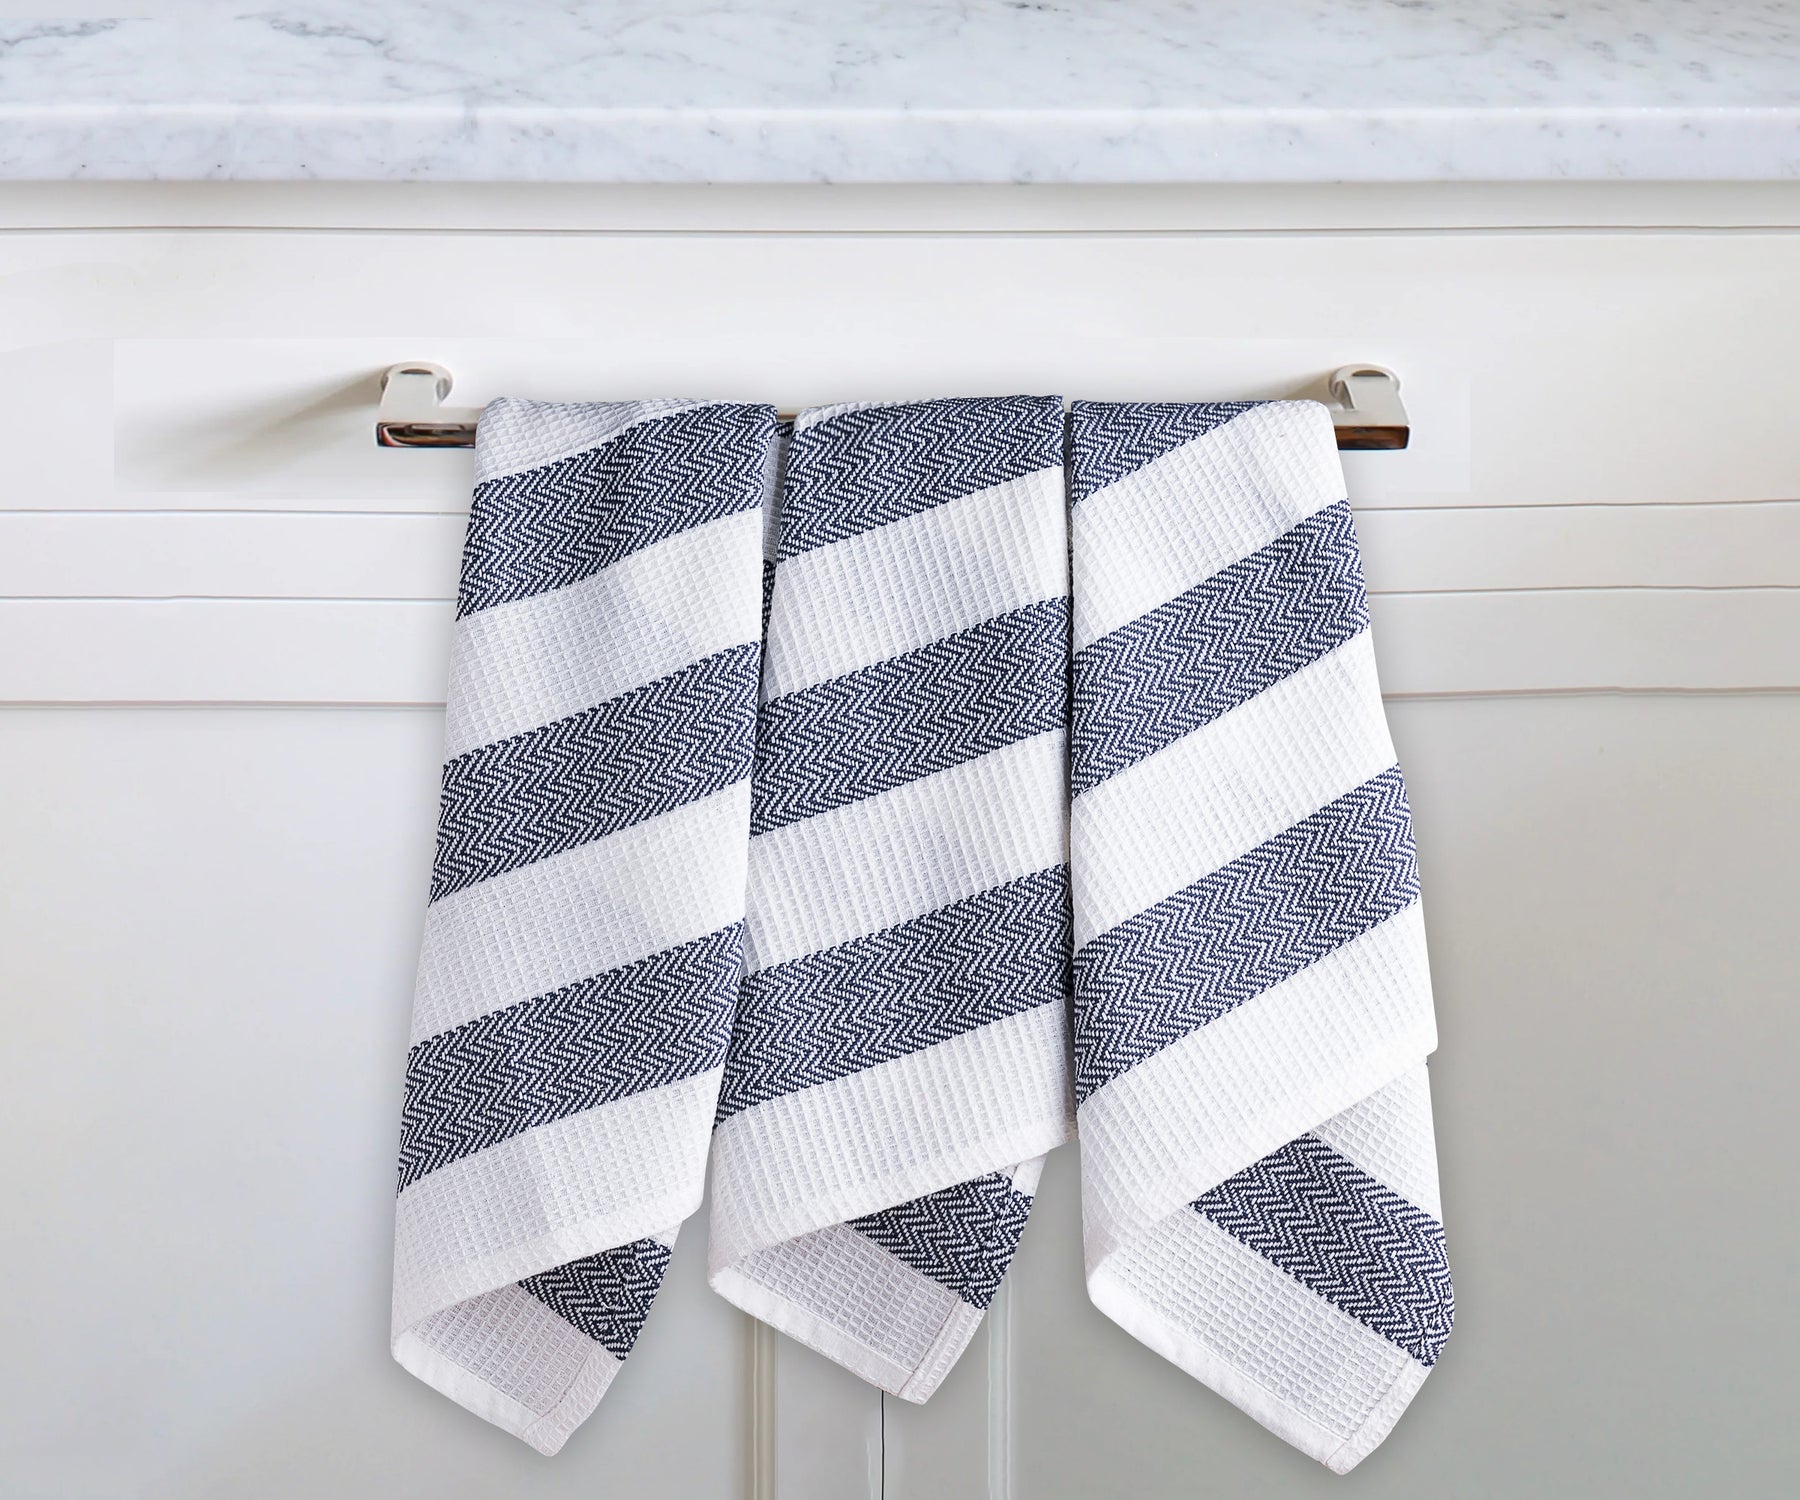 Dish towels, functional and decorative for your kitchen.